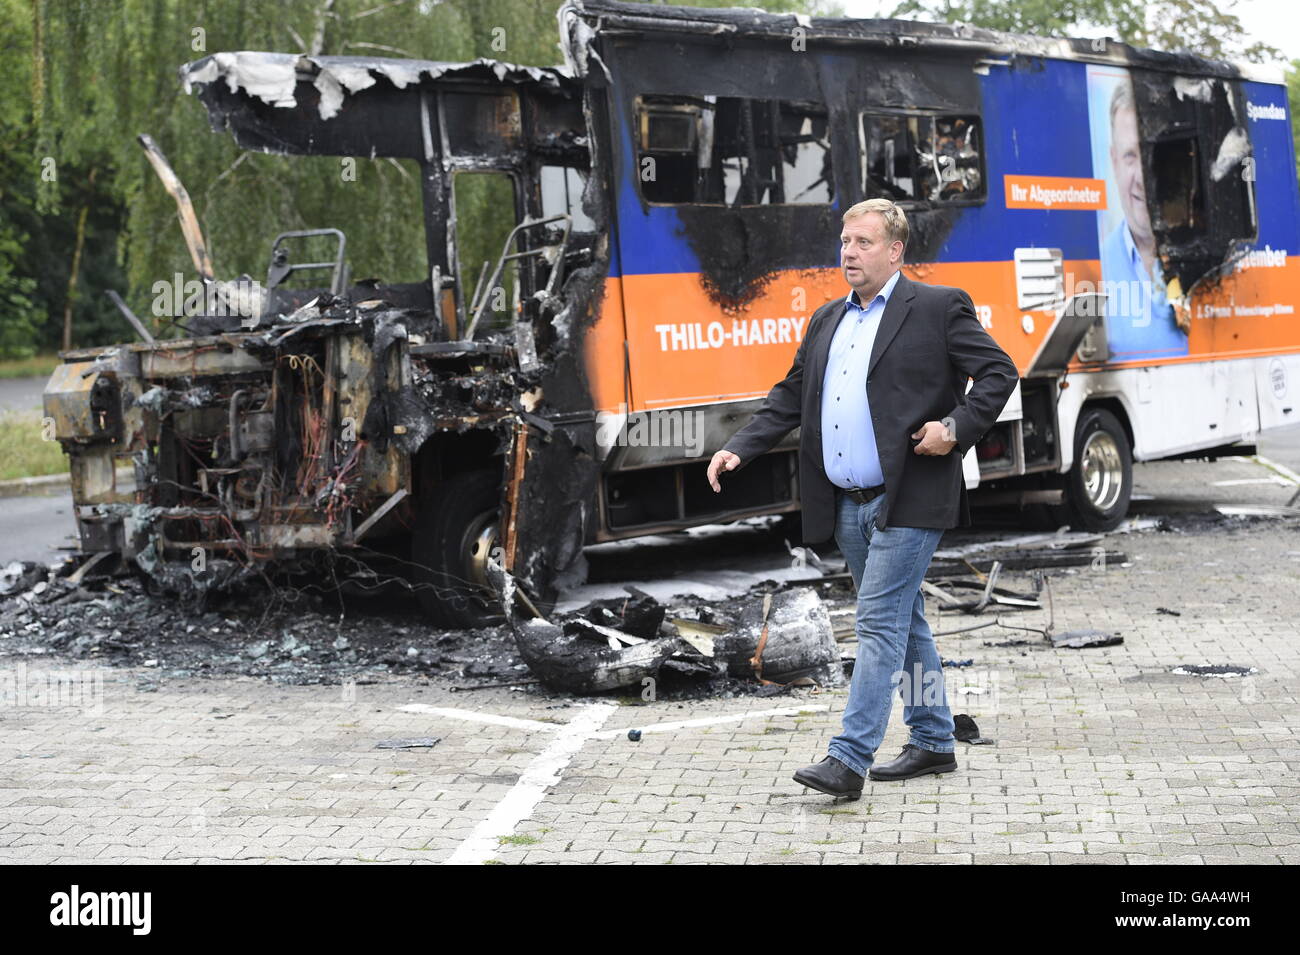 Berlin, Germany. 5th Aug, 2016. CDU politician Thilo-Harry Wollenschlaeger walking past his burned-out election campaign bus in Berlin, Germany, 5 August 2016. The campaign bus was completely gutted by fire in Berlin-Staaken. The polizeilicher Staatsschutz (lit. police state security) is investigating. PHOTO: RAINER JENSEN/DPA/Alamy Live News Stock Photo